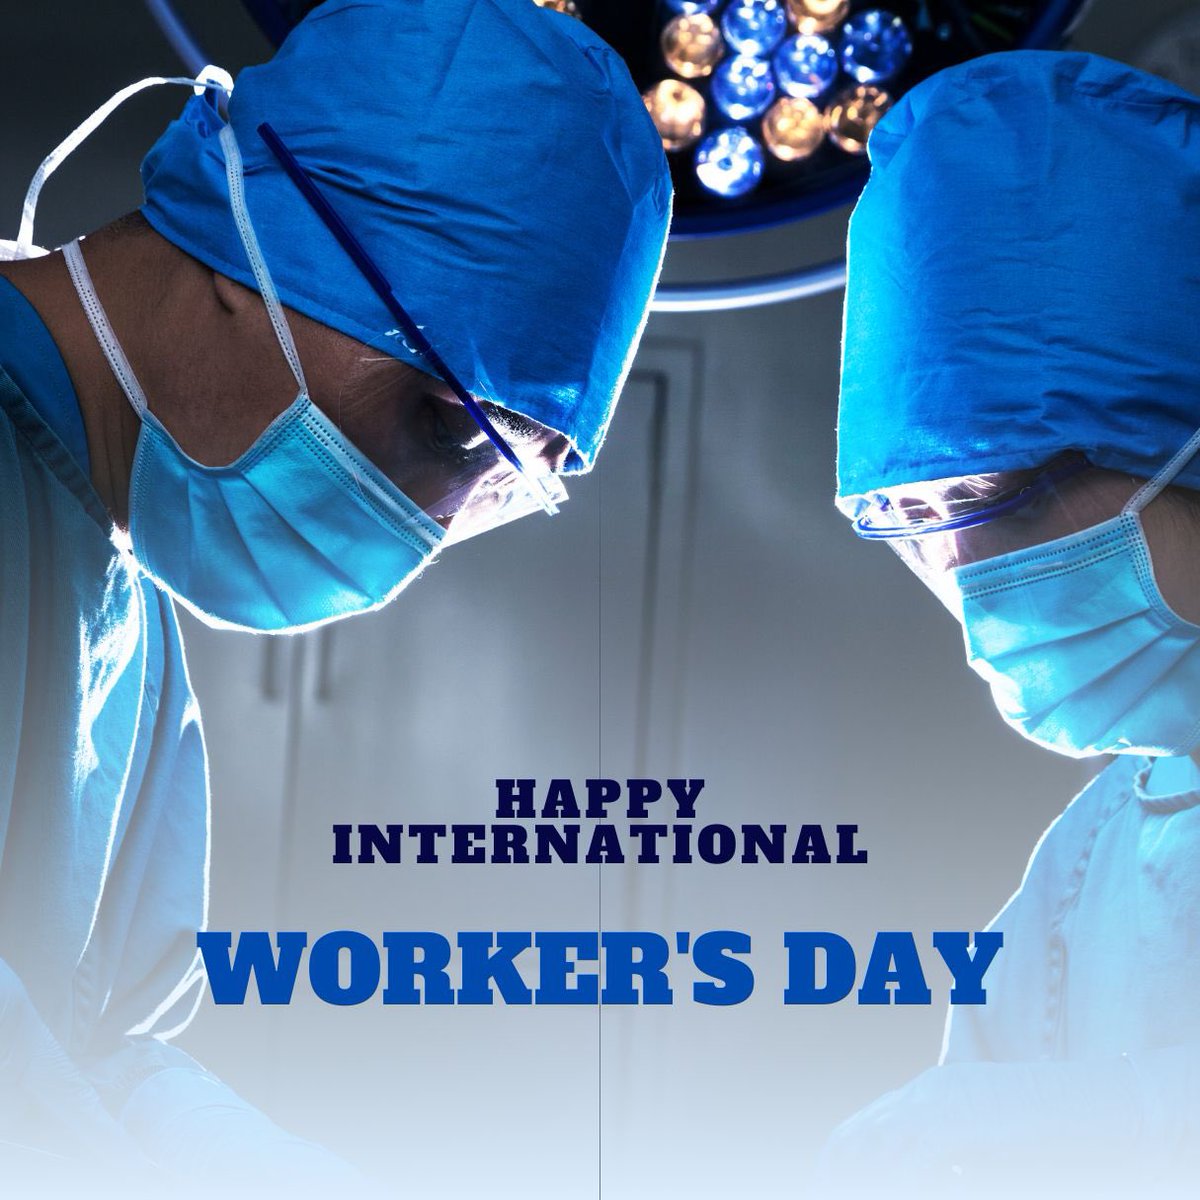 Happy International Workers Day! , we celebrate the incredible dedication and hard work of Anaesthesiologists and healthcare workers around the world. Your tireless efforts keep us healthy and safe every day. Thank you for all you do! #InternationalWorkersDay #HealthcareHeroes'